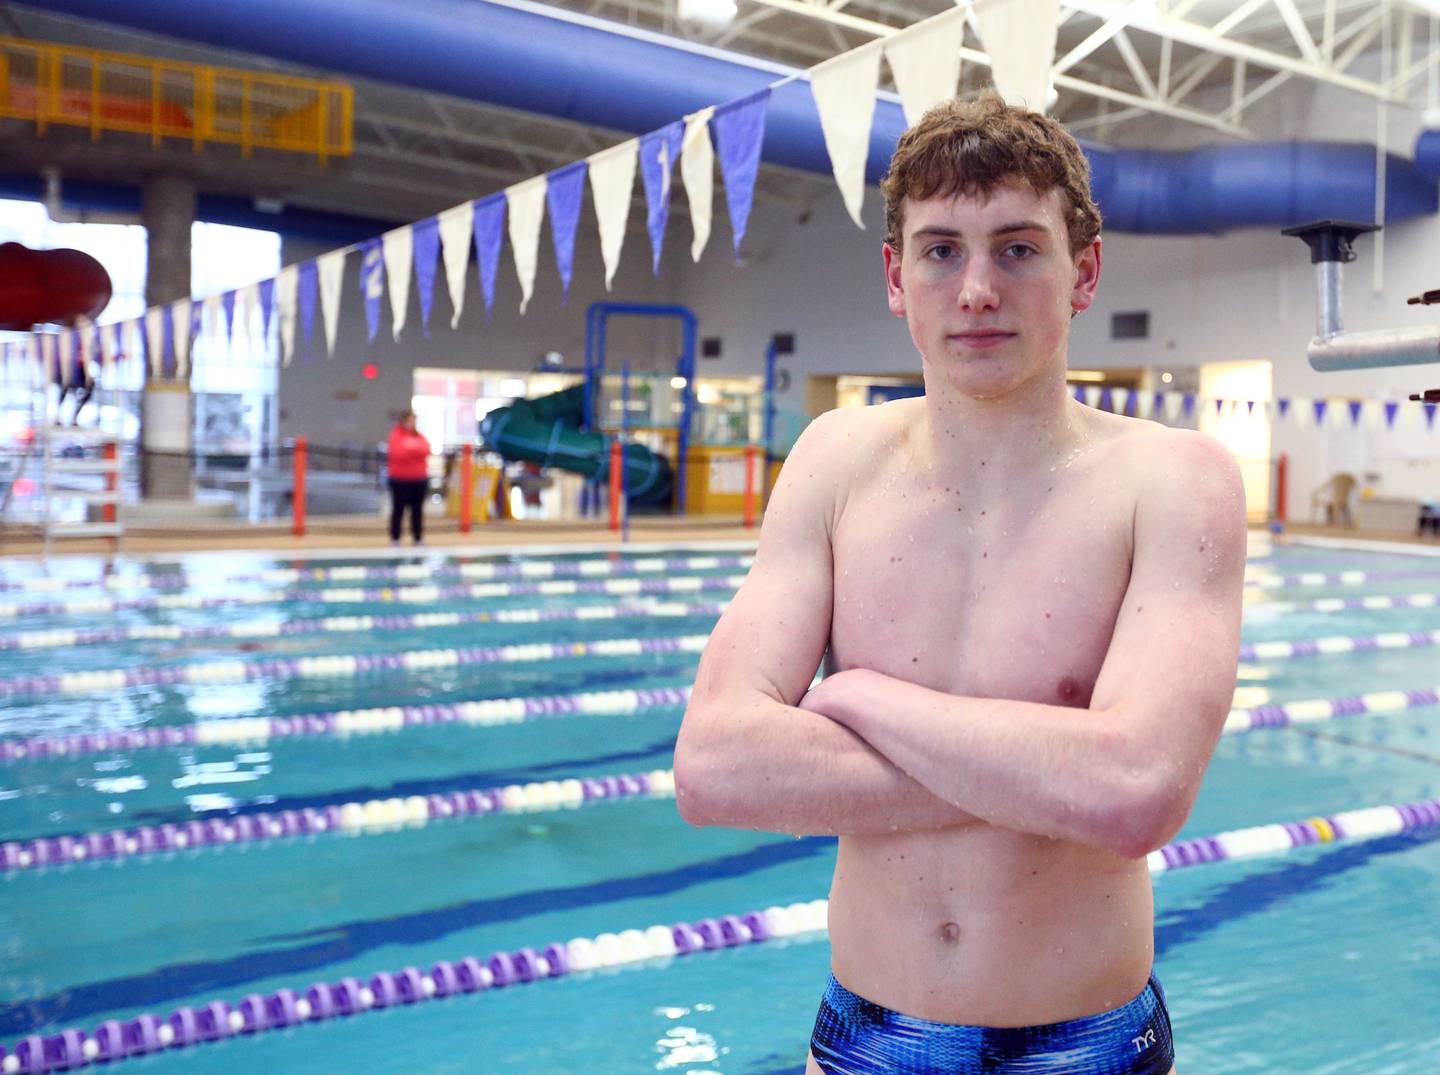 Caden Brooks, a senior at Princeton High School poses for a photo at the Illinois Valley YMCA in Peru on Thursday, Feb. 24, 2022 in Peru. Brooks, is competing at the IHSA State Swimming finals this weekend in Westmont.